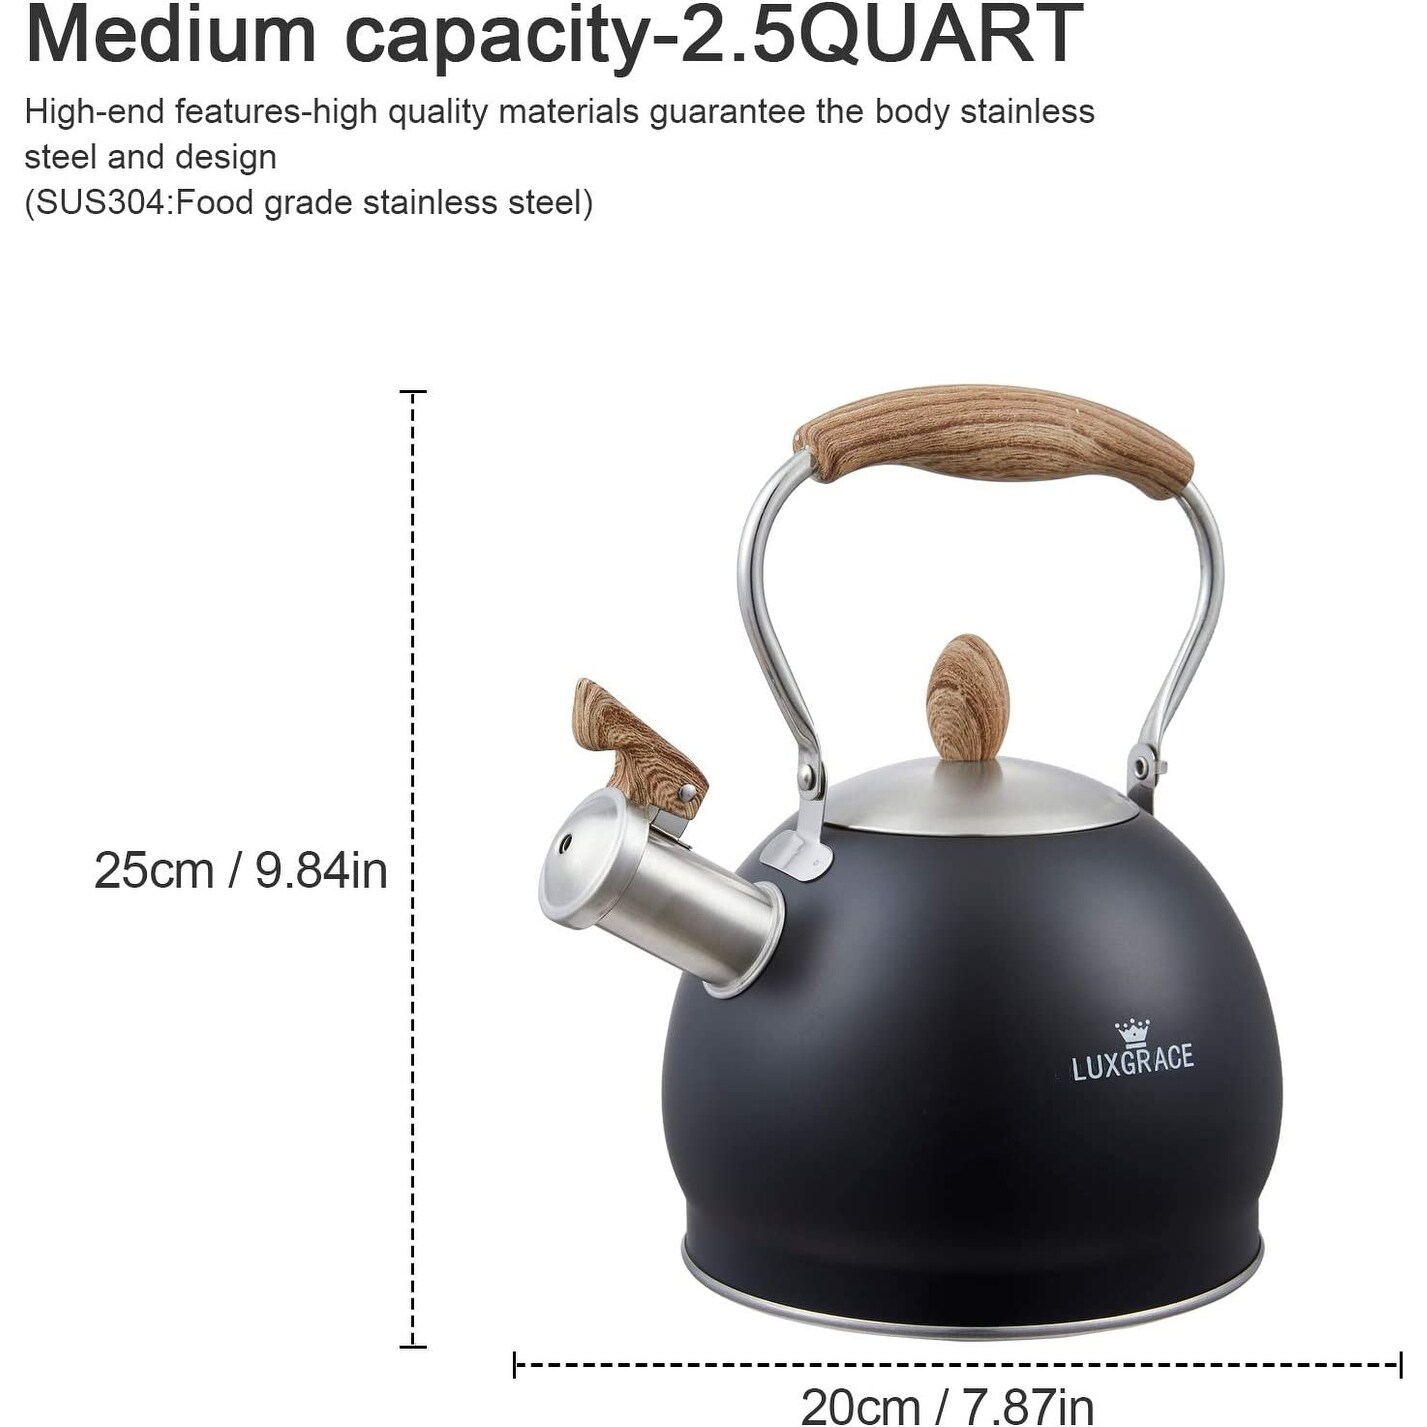 Creative Home Nobili-Tea 1.0 Quart Stainless Steel Tea Kettle with Infuser  Basket and Aluminum Capsulated Bottom for Even Heat Distribution, Satin